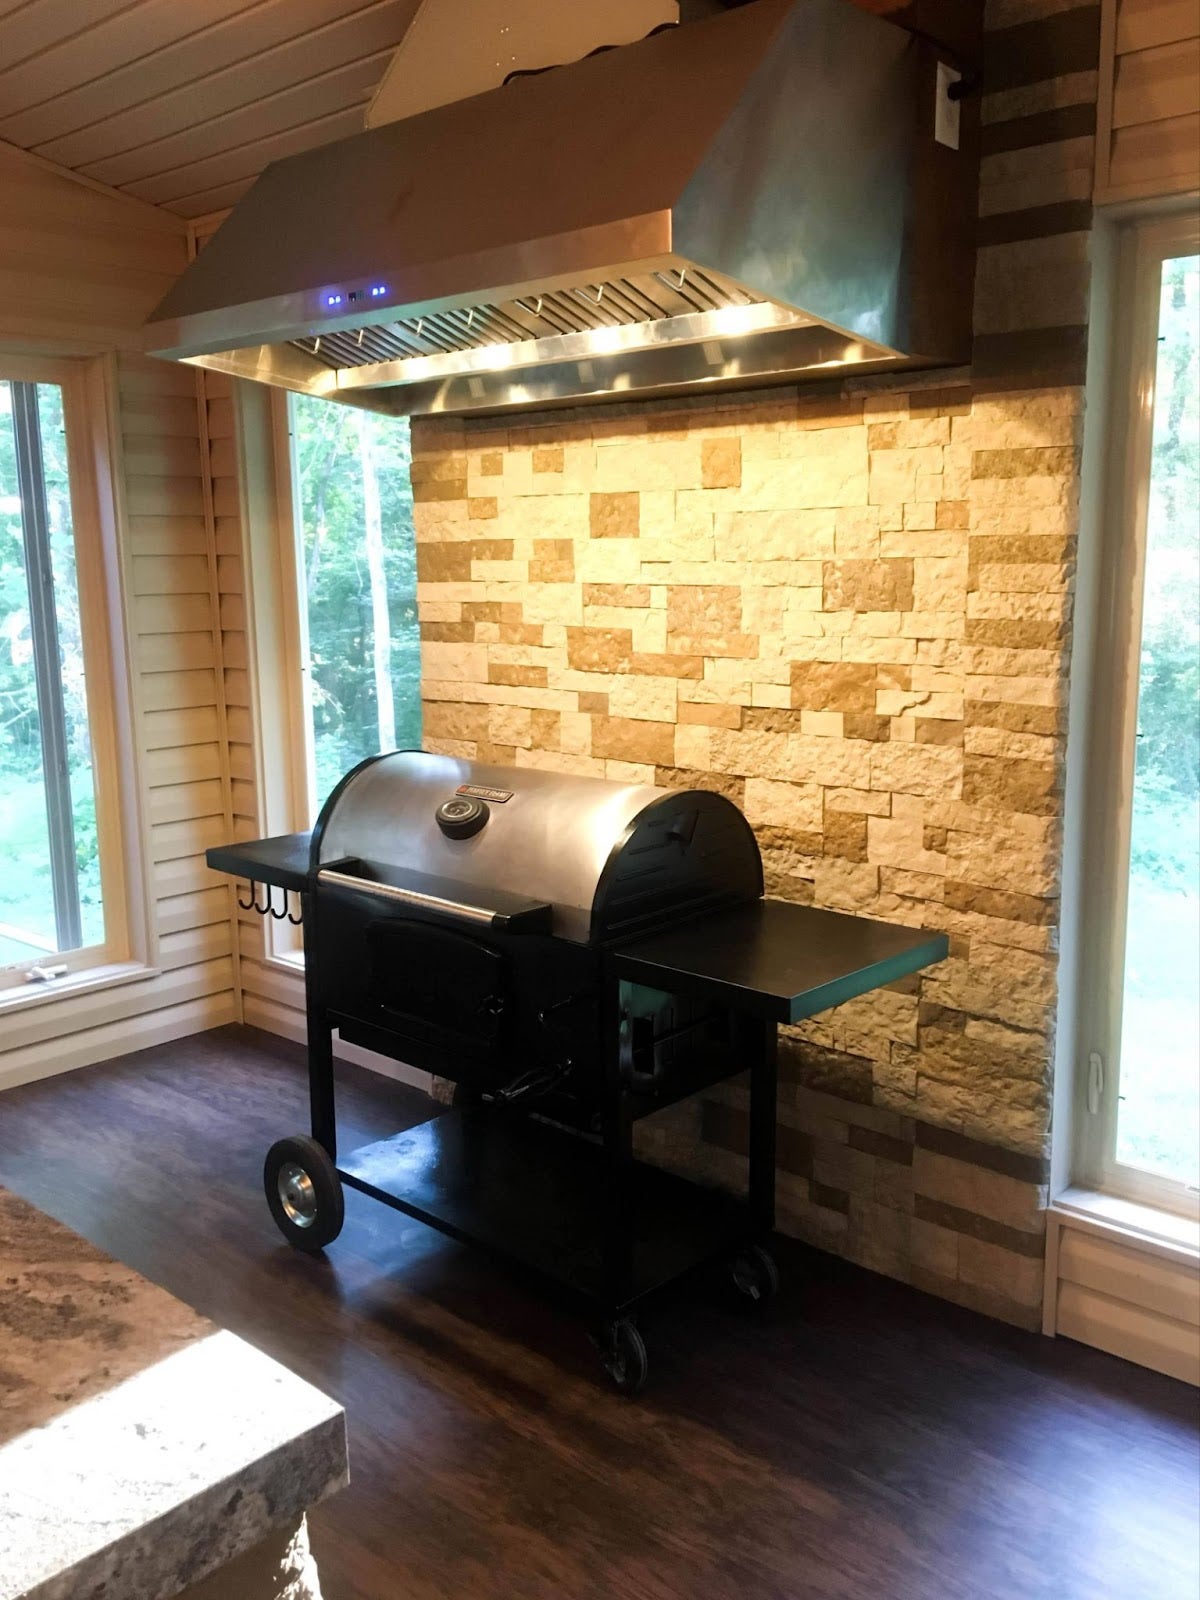 Functional Indoor Grilling Station: Black pellet grill with Proline PLFW 832 range hood in a versatile indoor/outdoor space. Brushed stainless steel hood complements the wood and stone, with task lighting and large windows for a bright ambiance. - Proline Range Hoods - prolinerangehoods.com 